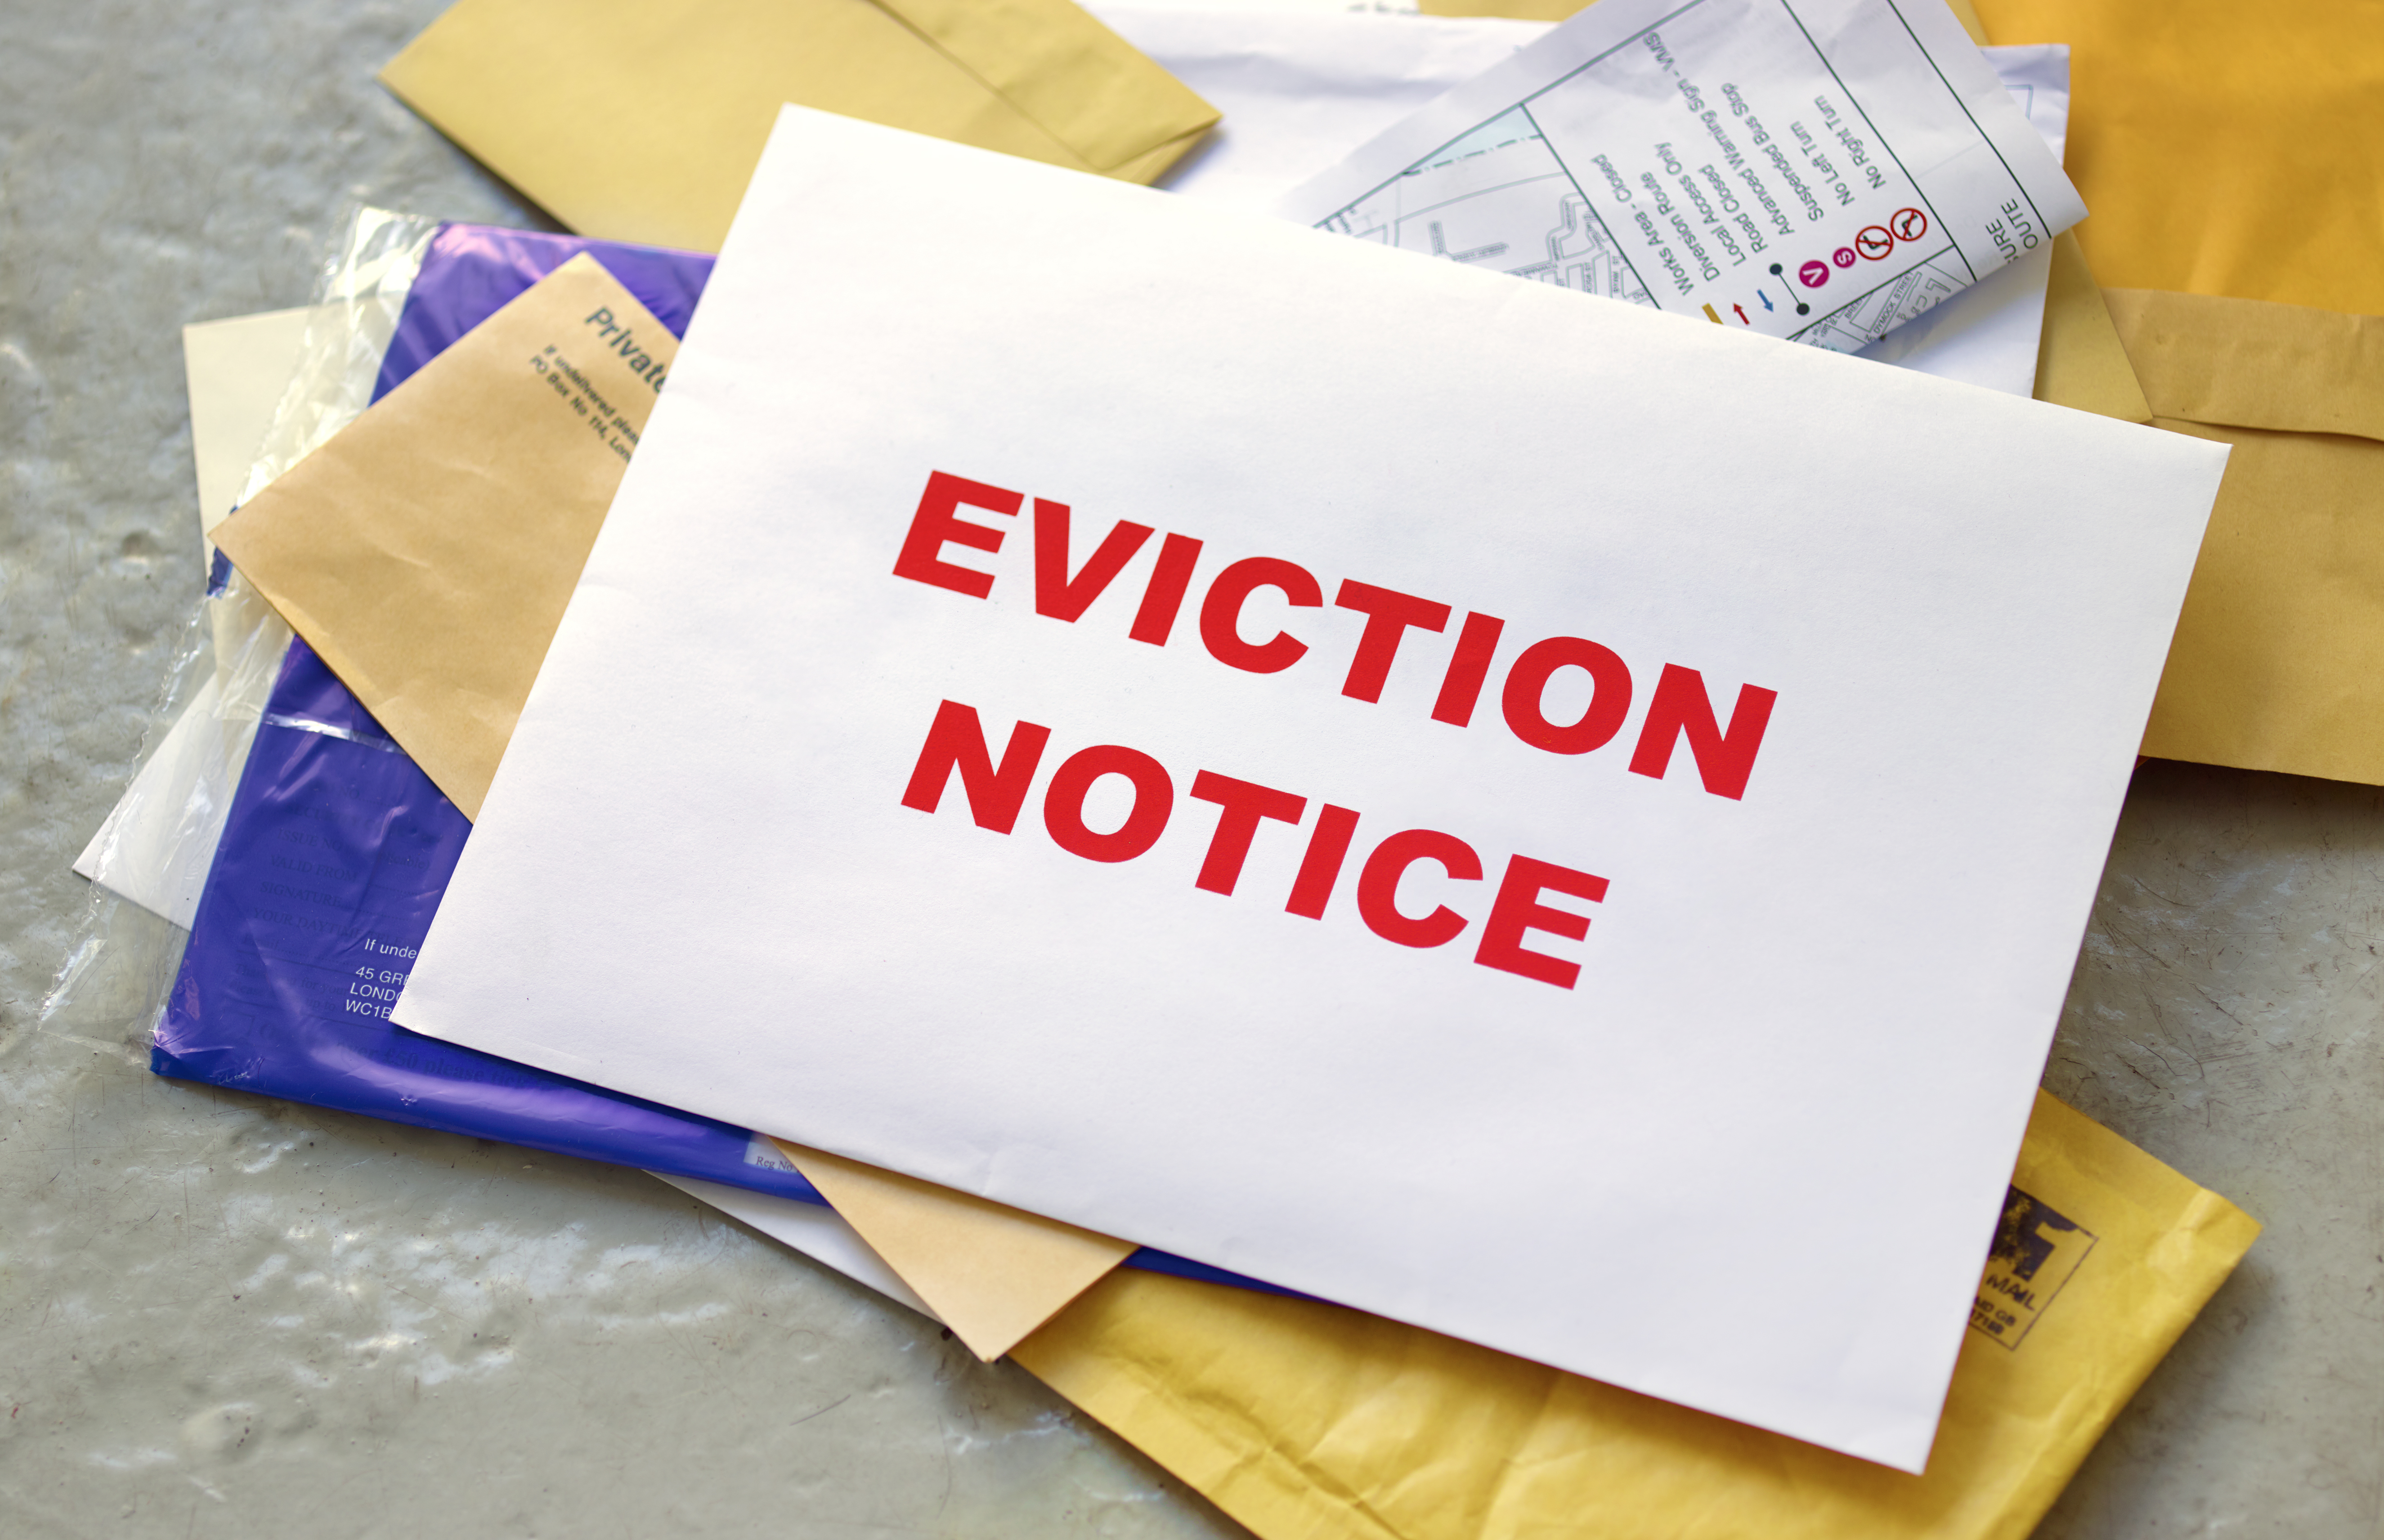 An eviction notice | Source: Getty Images